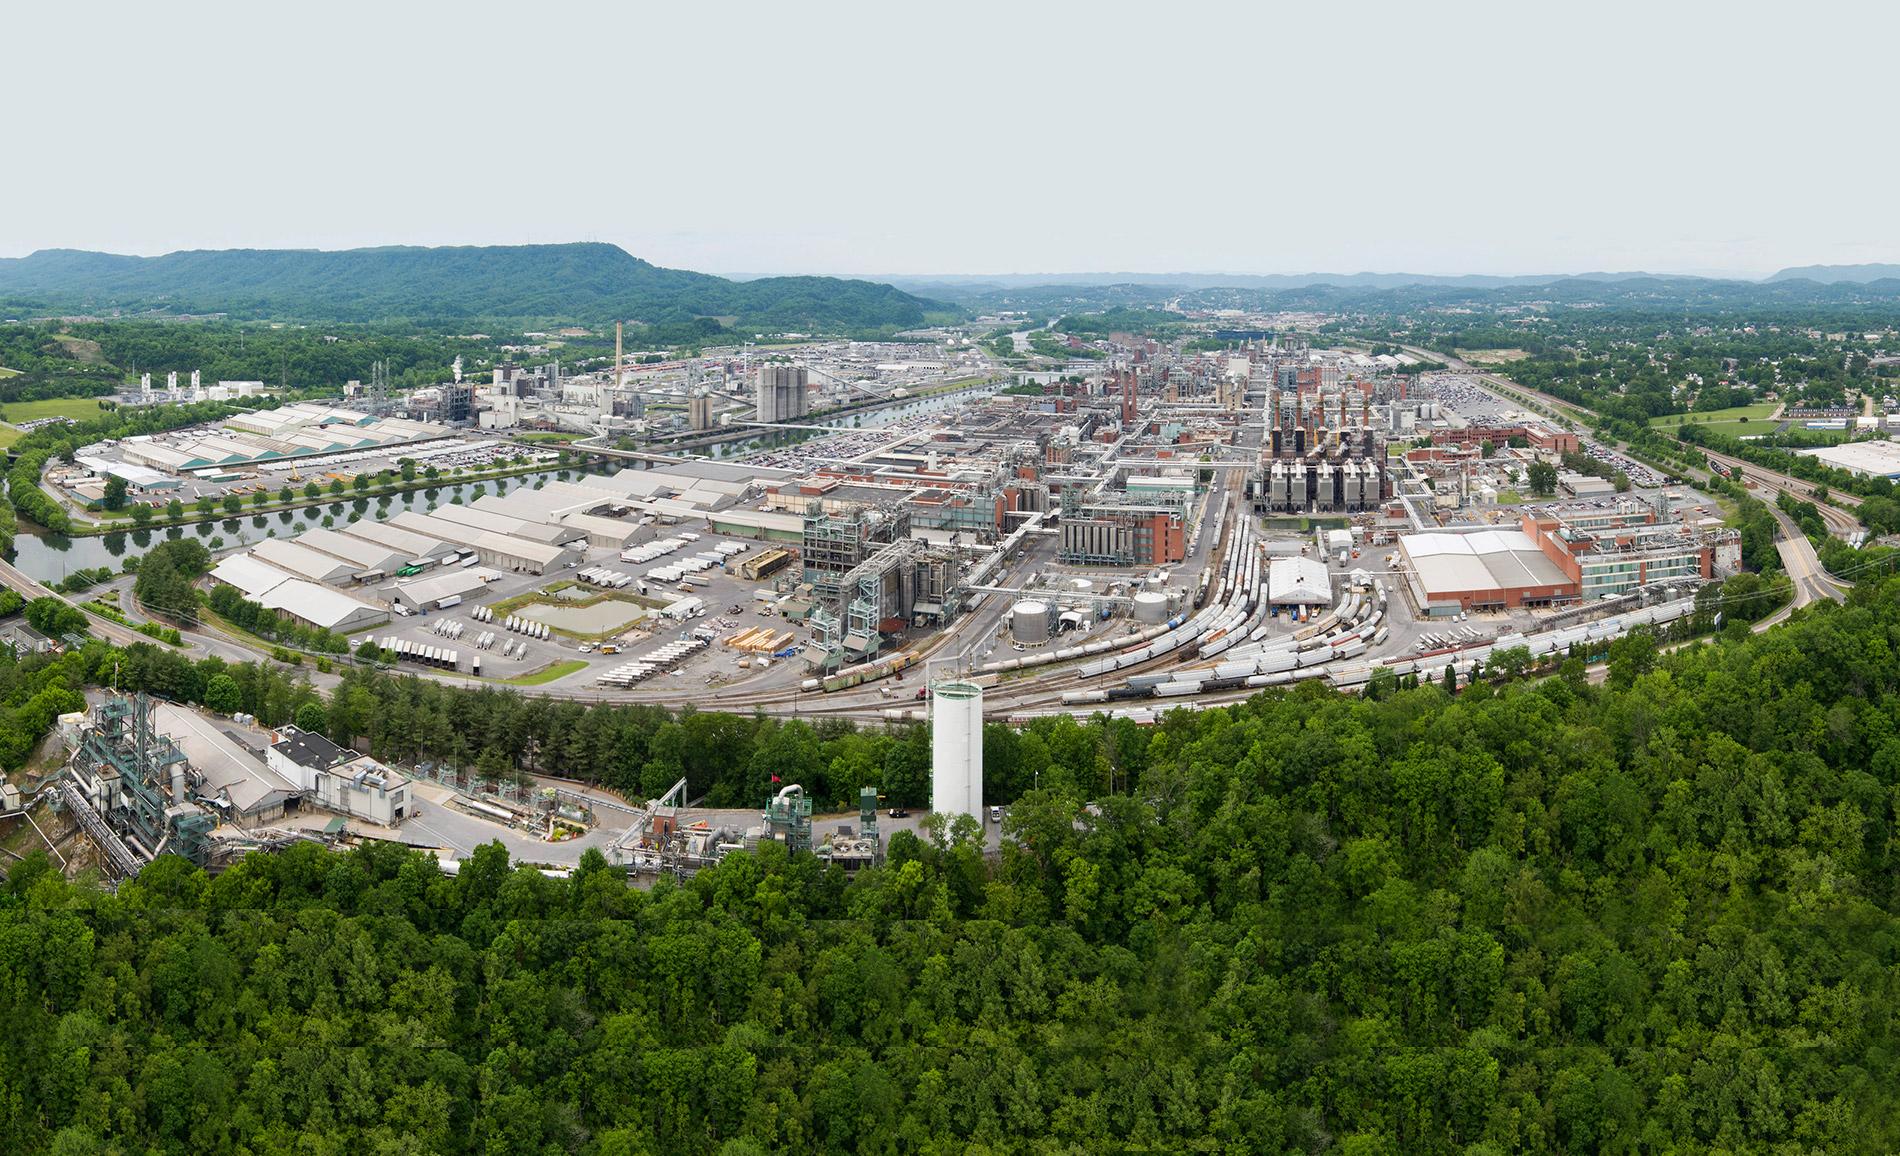 An aerial view of Eastman's Kingsport, Tennessee headquarters facility. Courtesy, Eastman Chemical